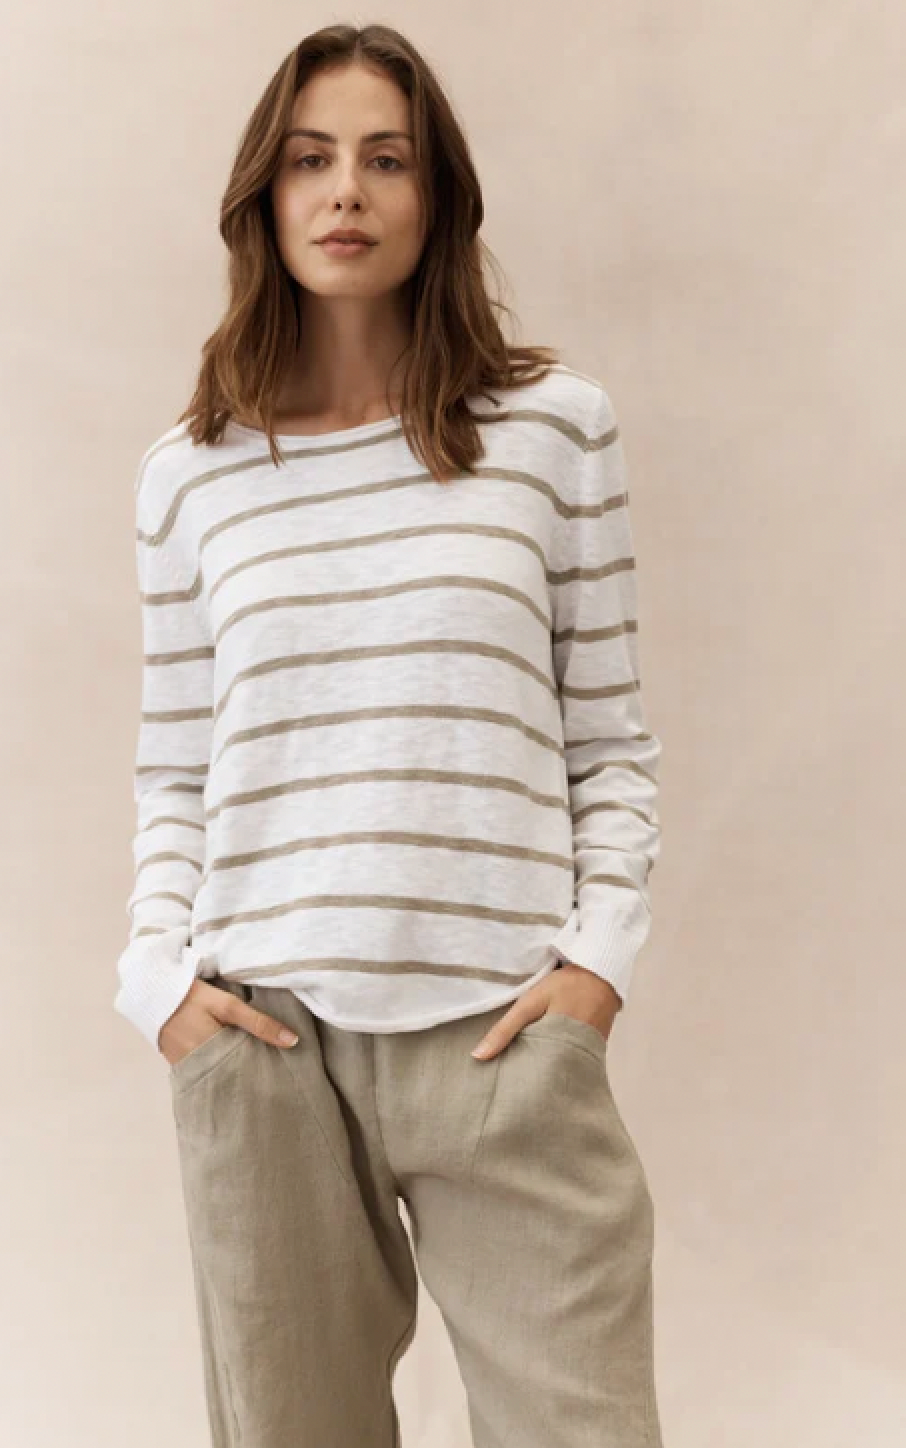 the stripe nellie top by little lies is a khaki and white stripe cotton knit pull on top